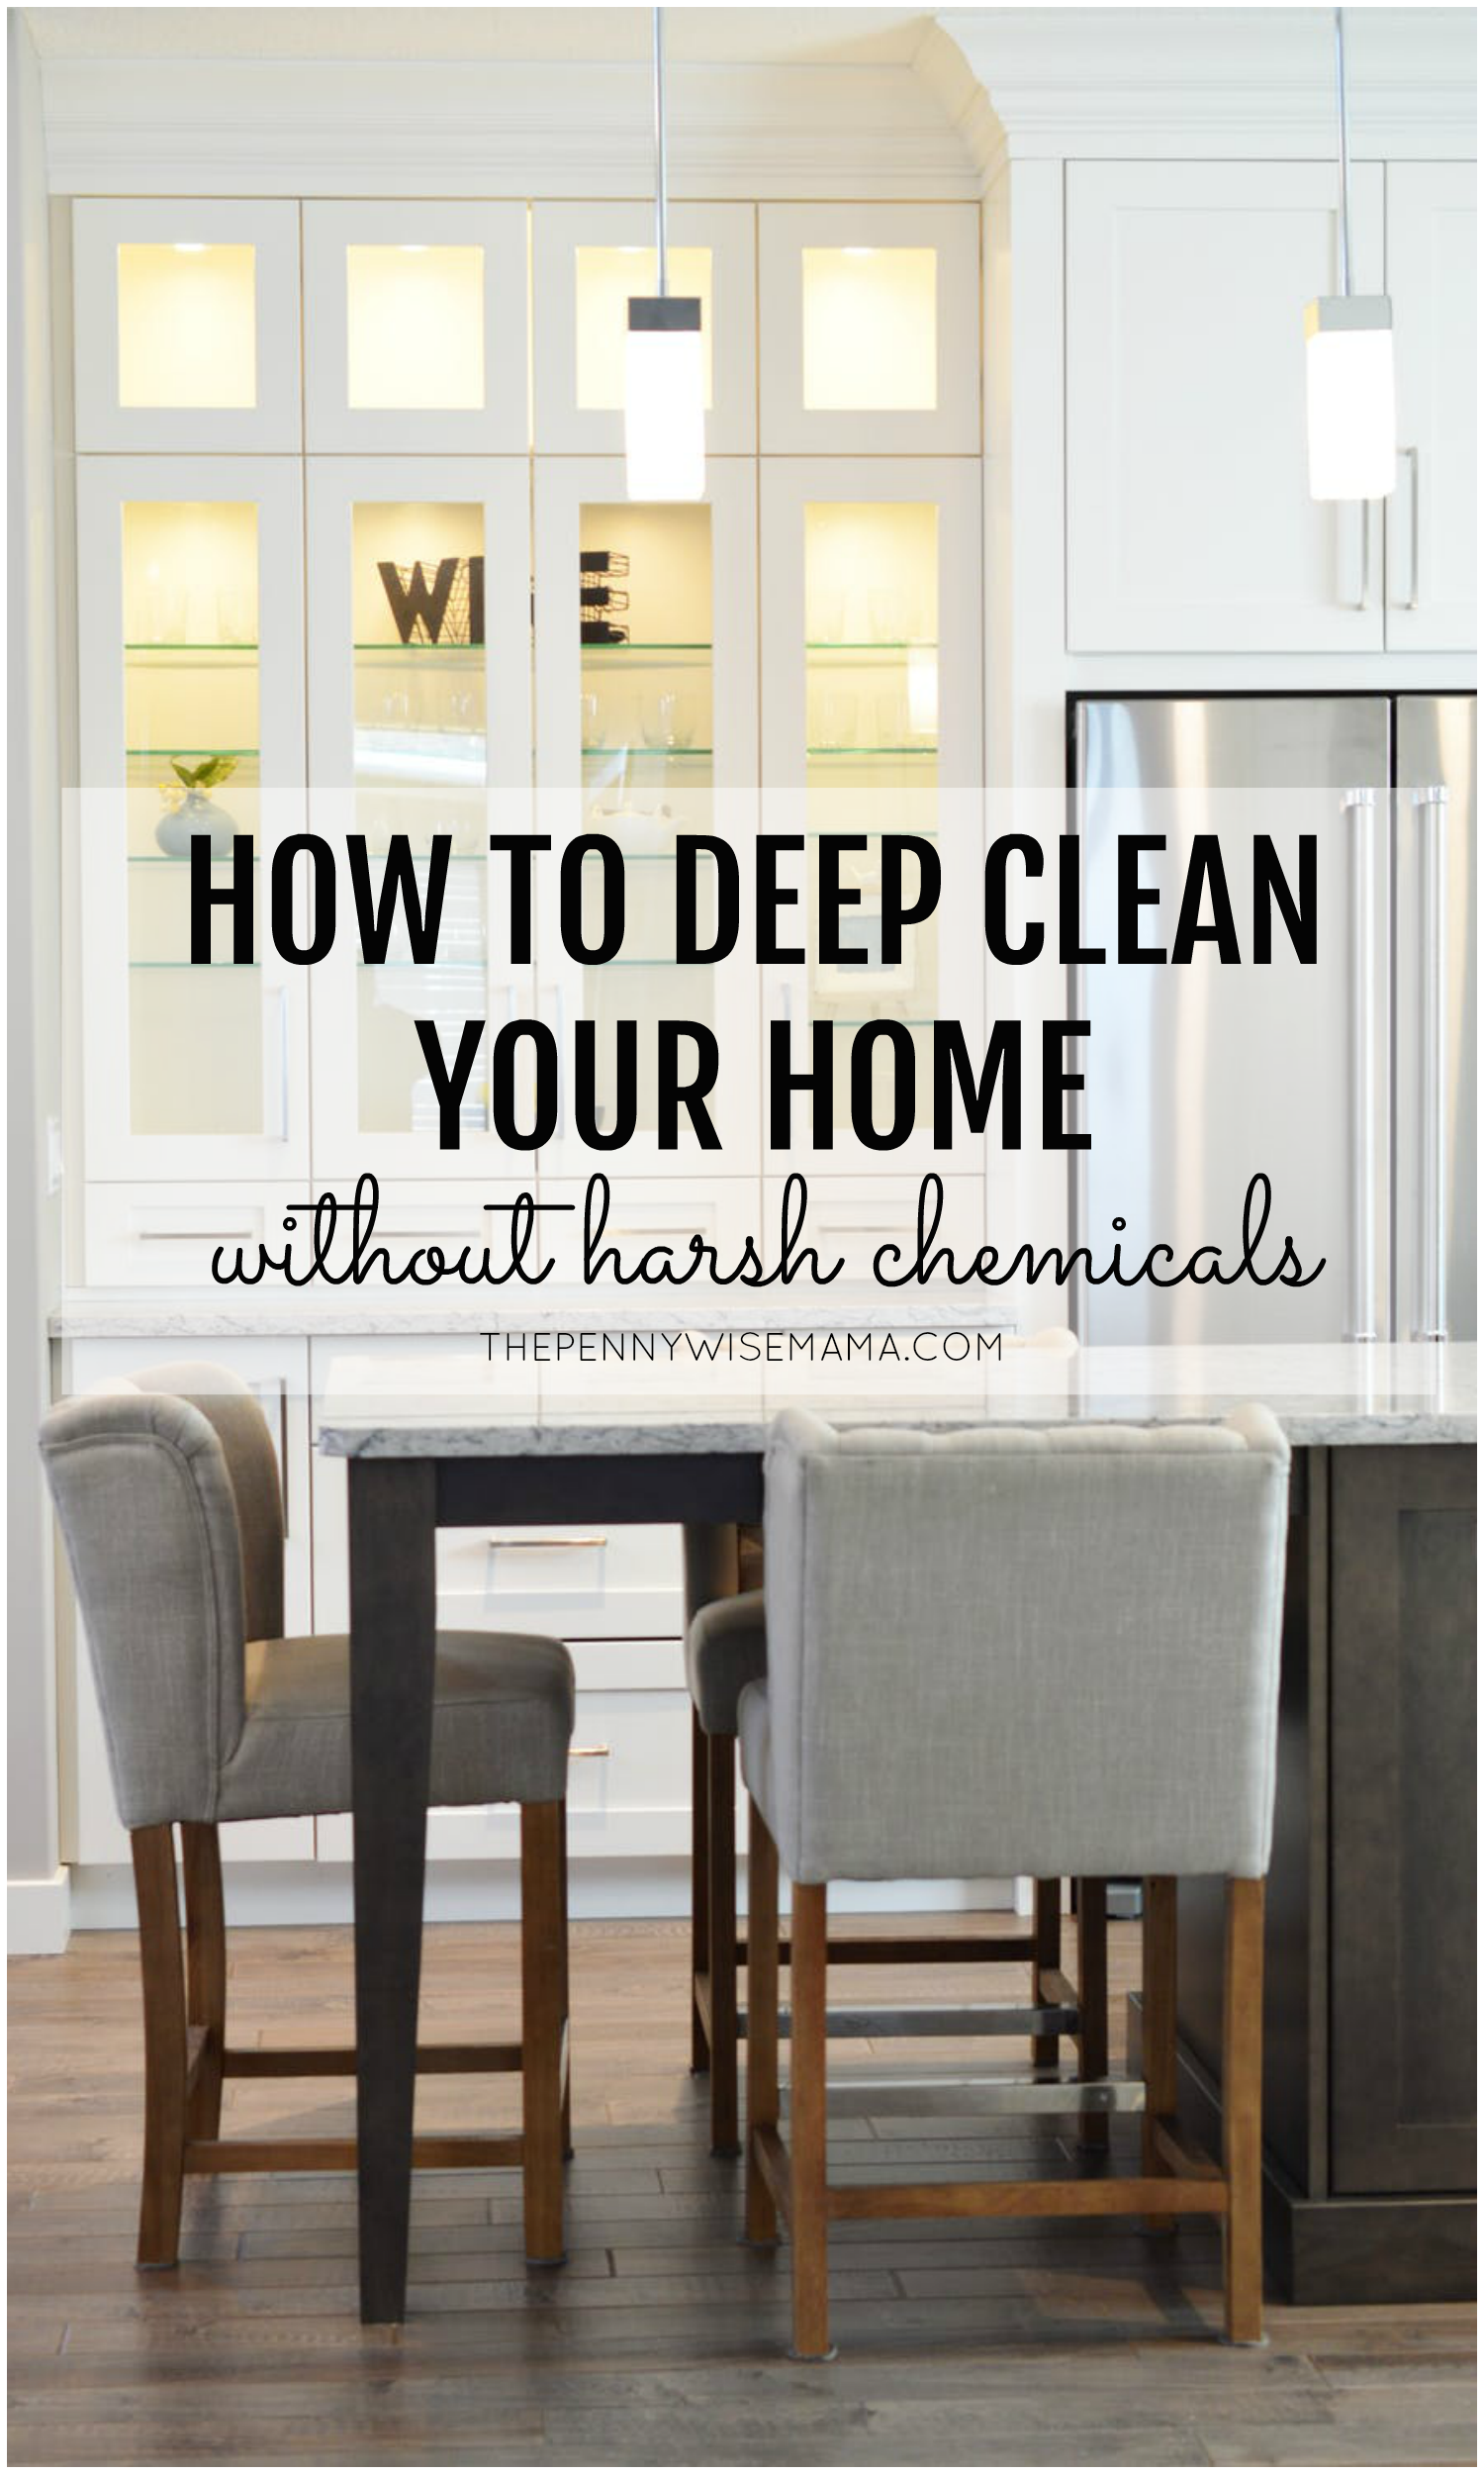 How to Deep Clean Your Home Without Harsh Chemicals